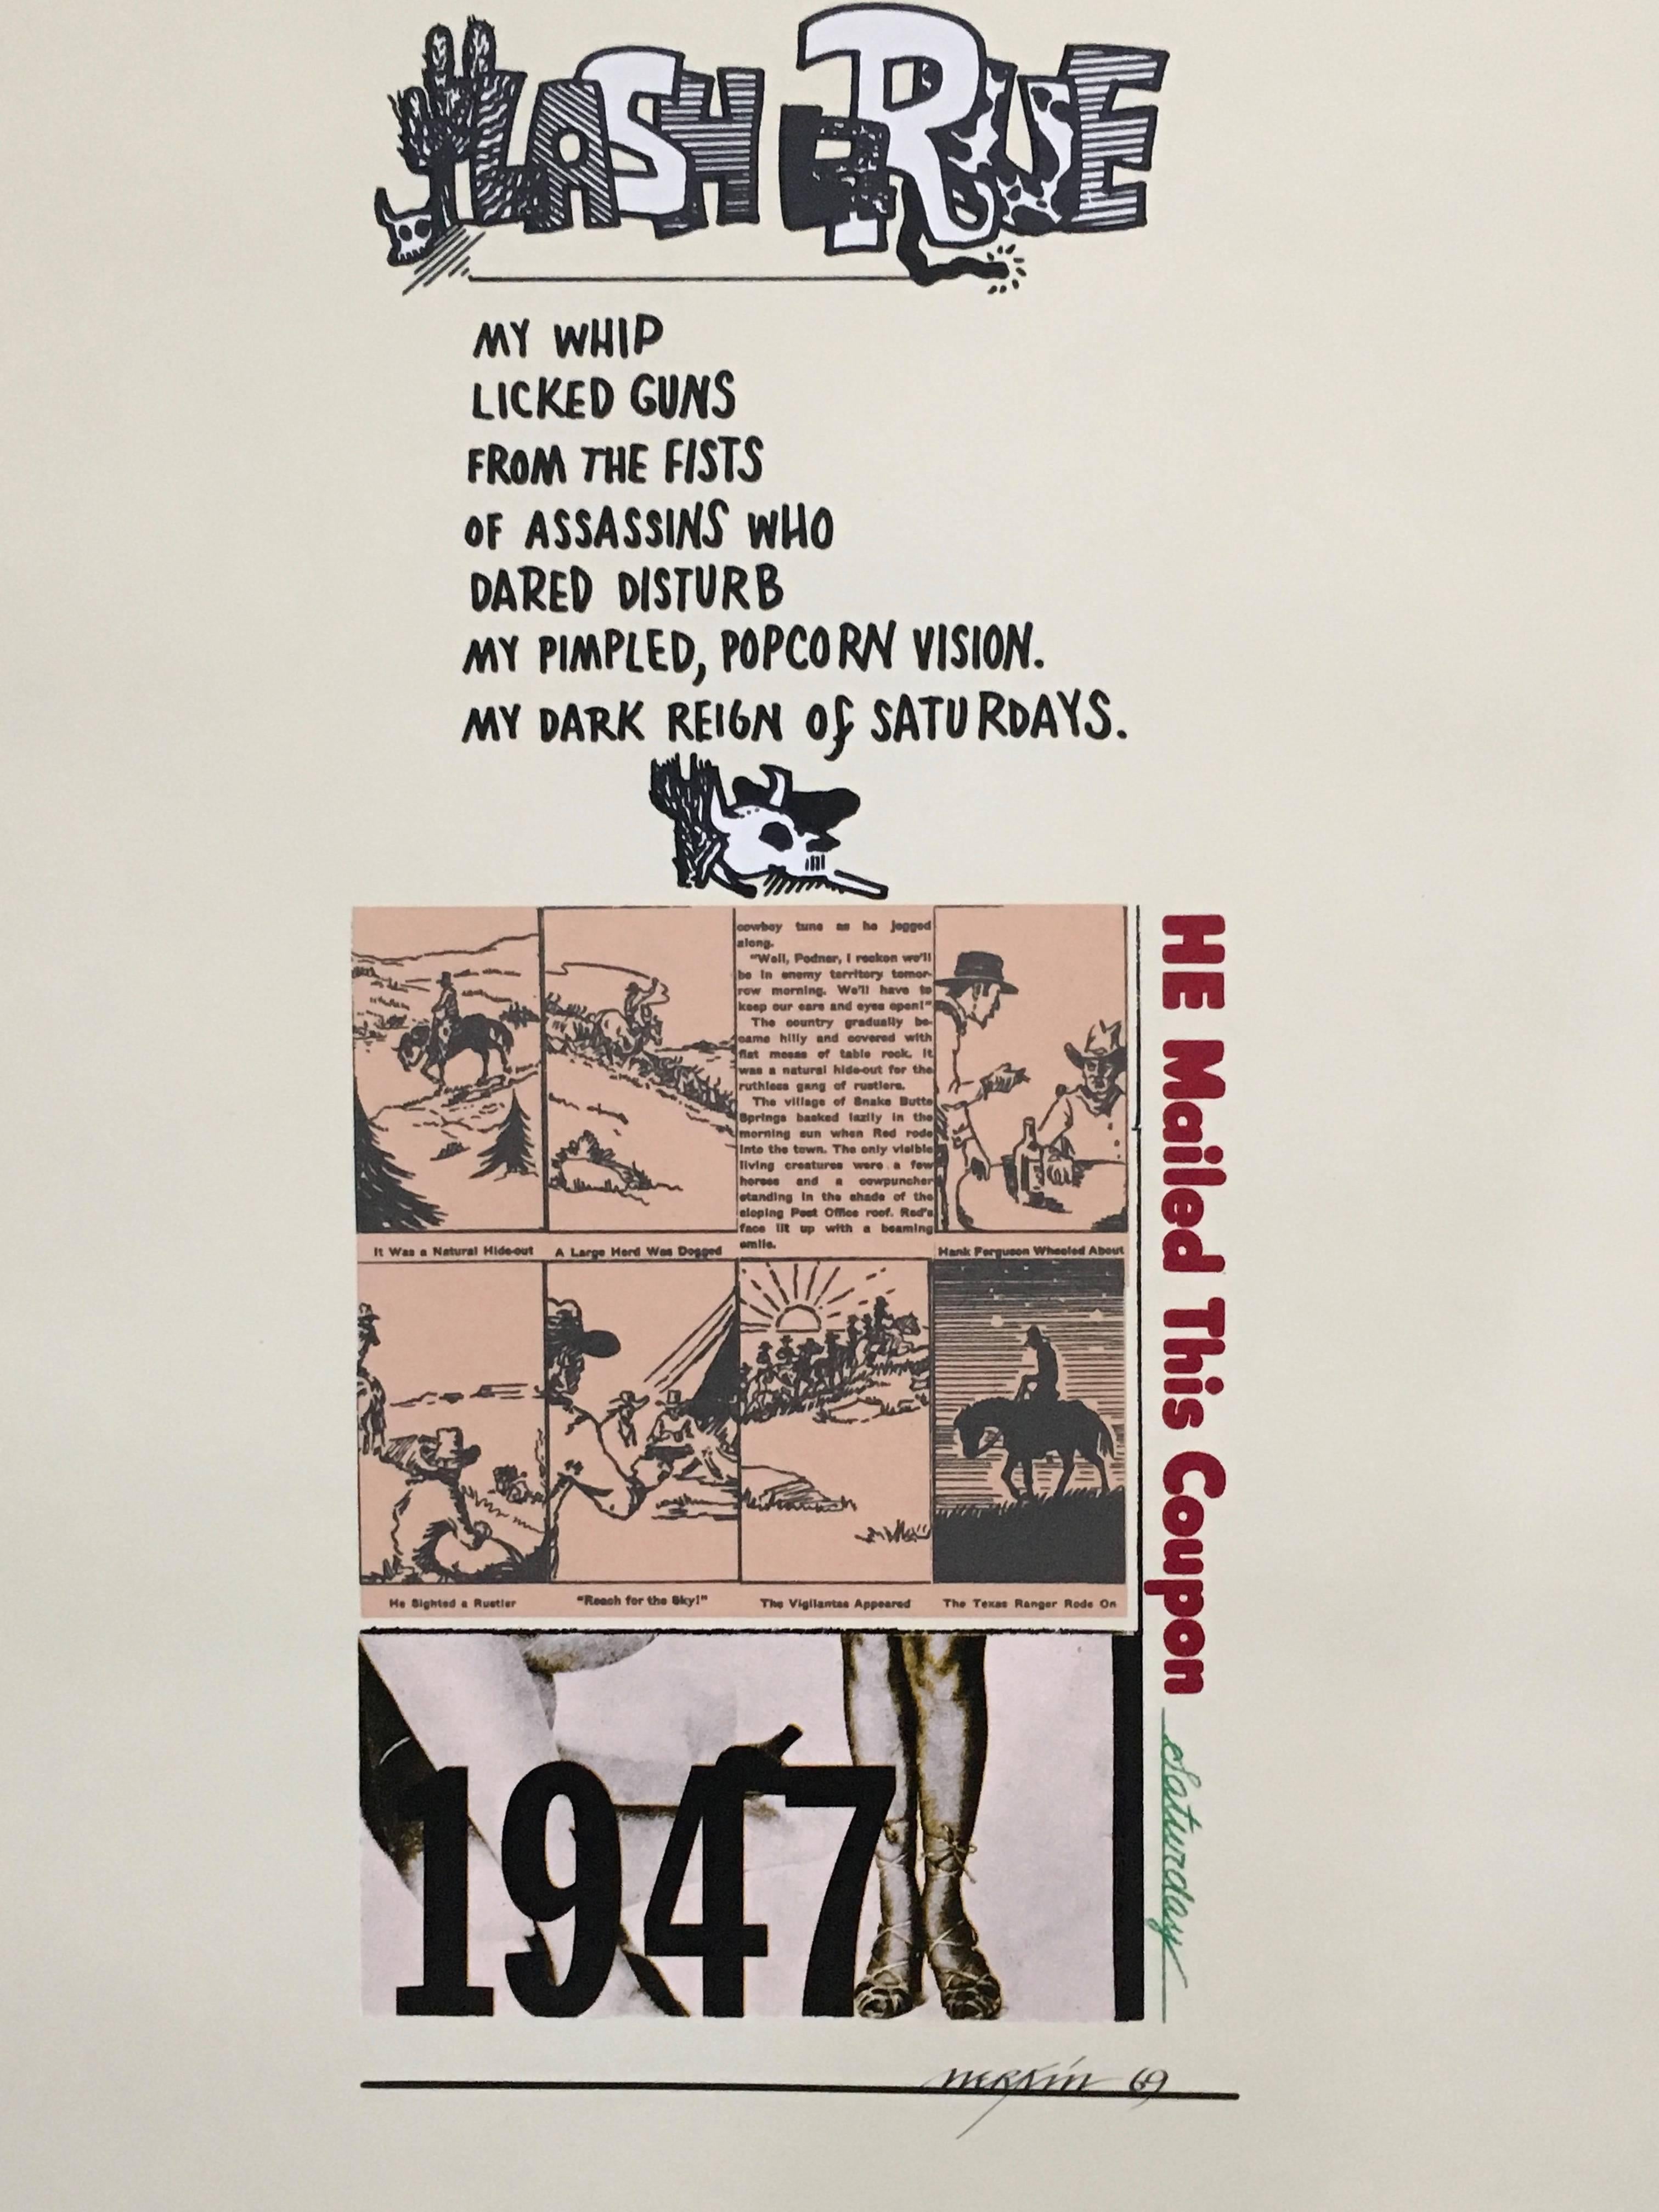  Poetry by J.D. REED Artwork by Richard Merkin screenprint in color, 1969, edition 22/50 Published by Bizzaro, Providence, R.I. 

Richard Marshall Merkin (1938-2009) was an American painter, illustrator and arts educator. Merkin's fascination with